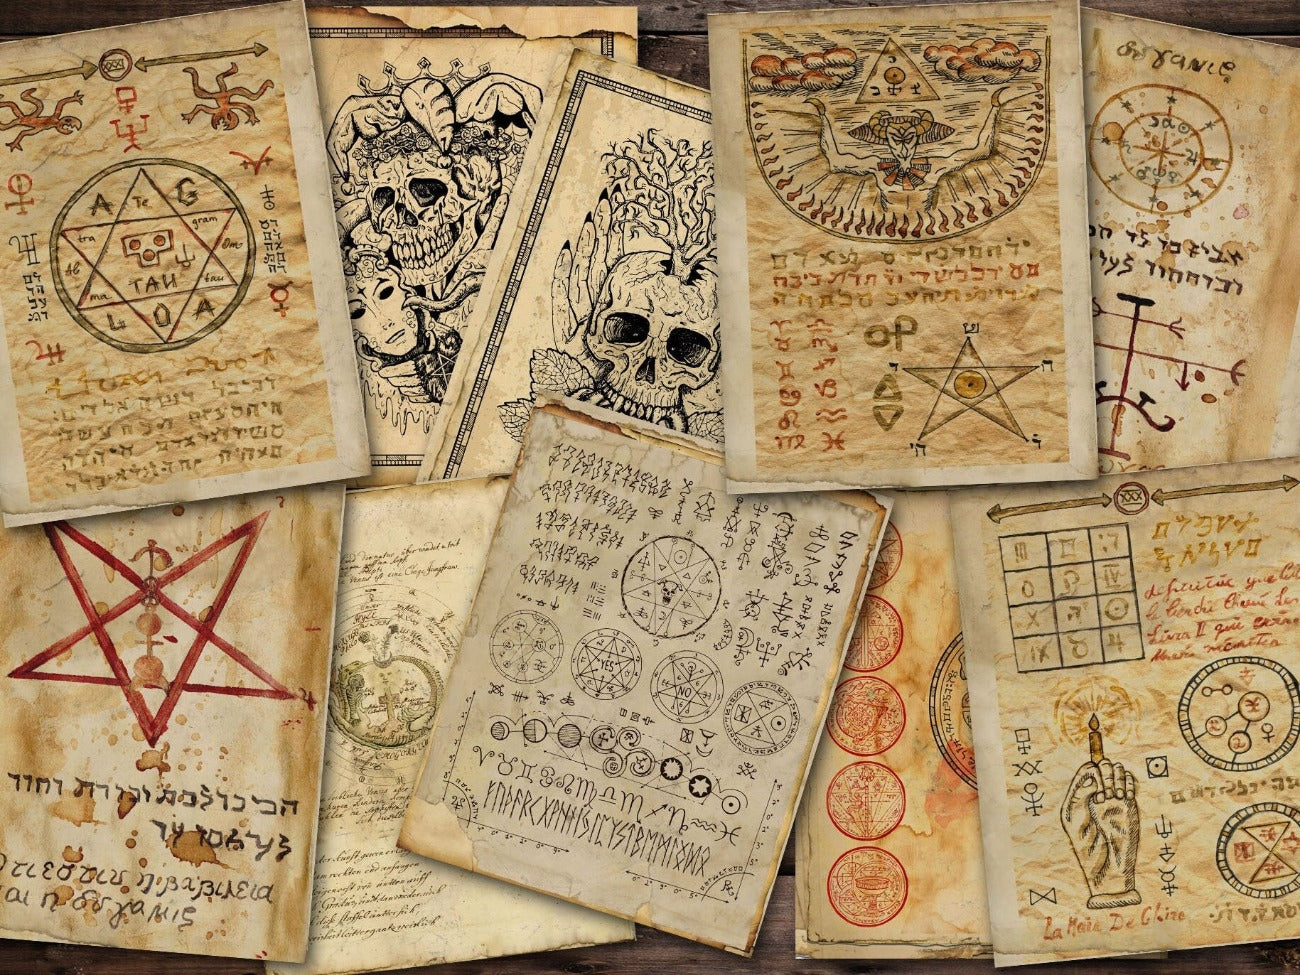 ALCHEMY JOURNAL 50 pages, Alchemy Science Occult Book, Hermetic Grimoire, Wicca Alchemical Manuscript, Devilish Witchcraft Illustrations - Morgana Magick Spell